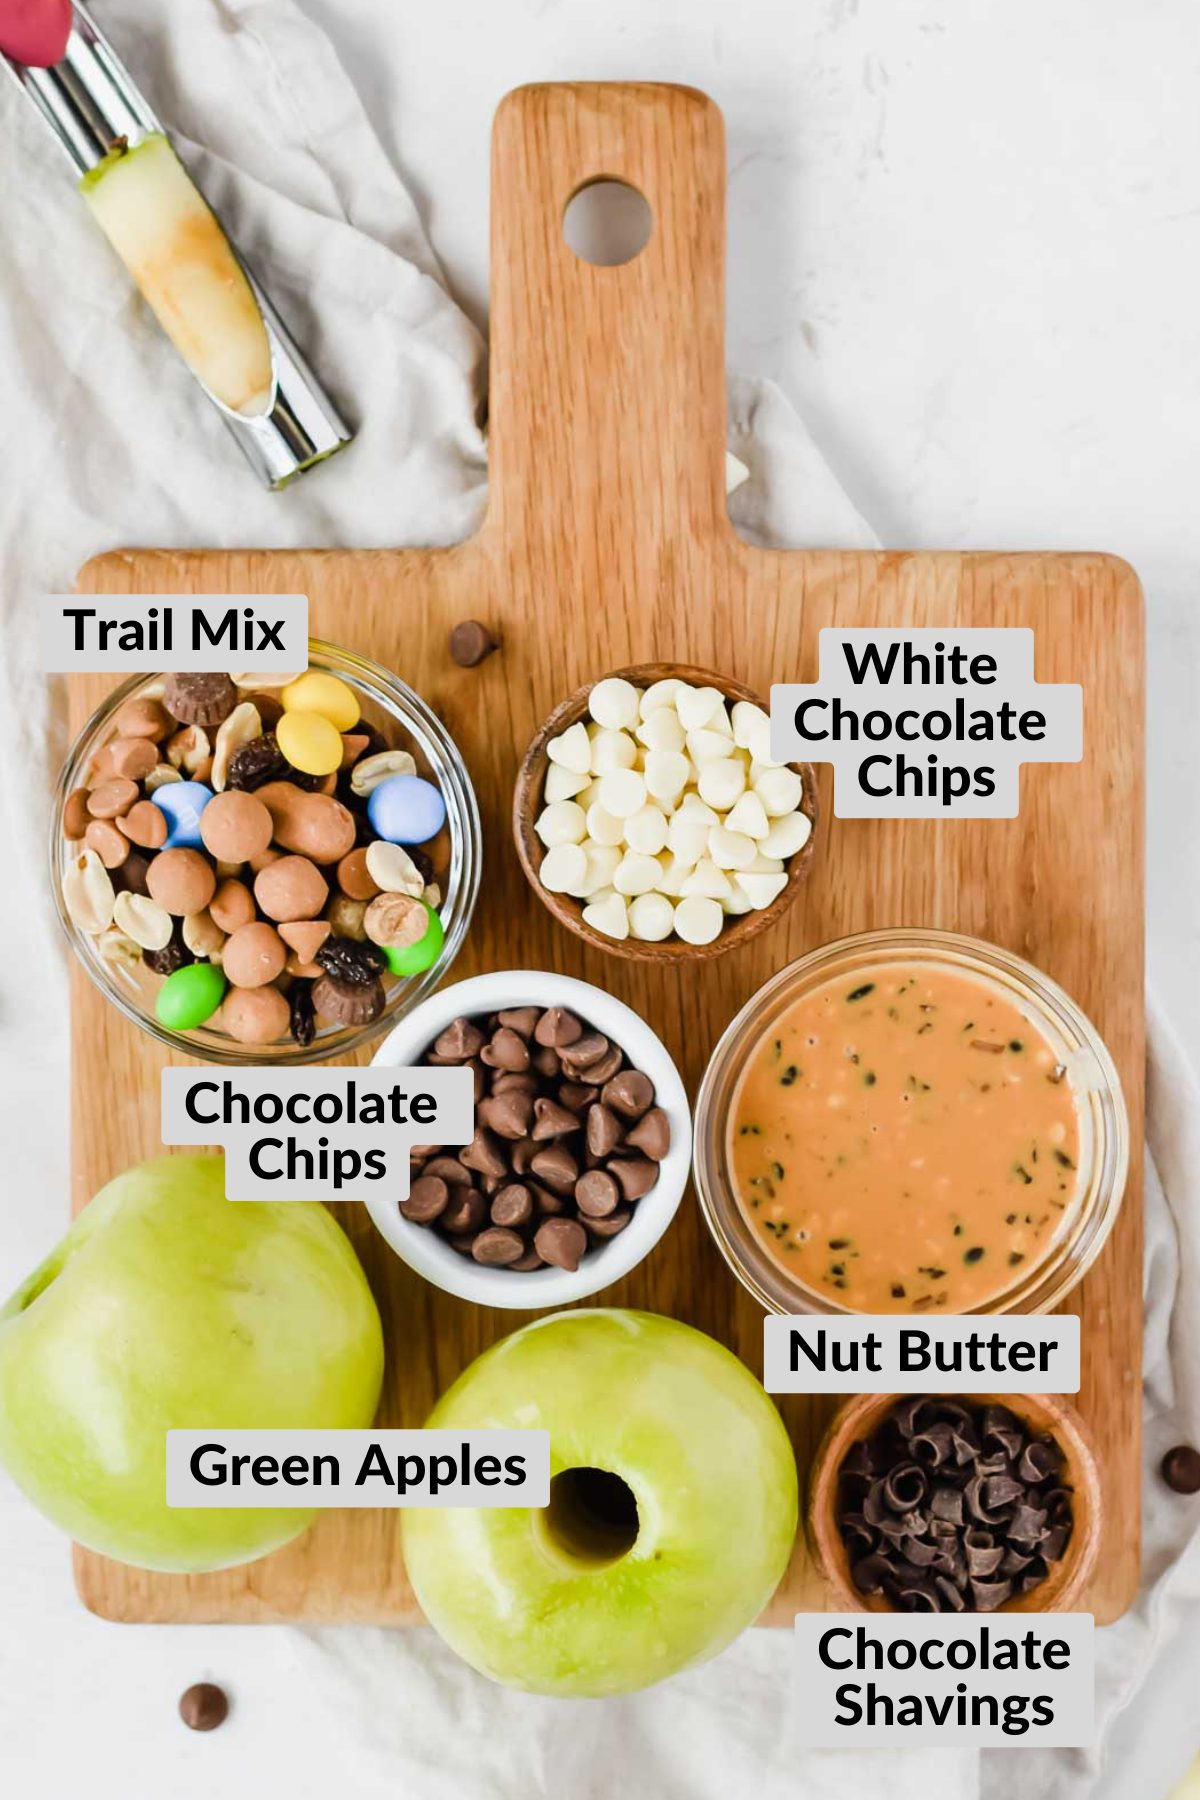 wooden tray with the ingredients needed for this recipe displayed in small bowls.